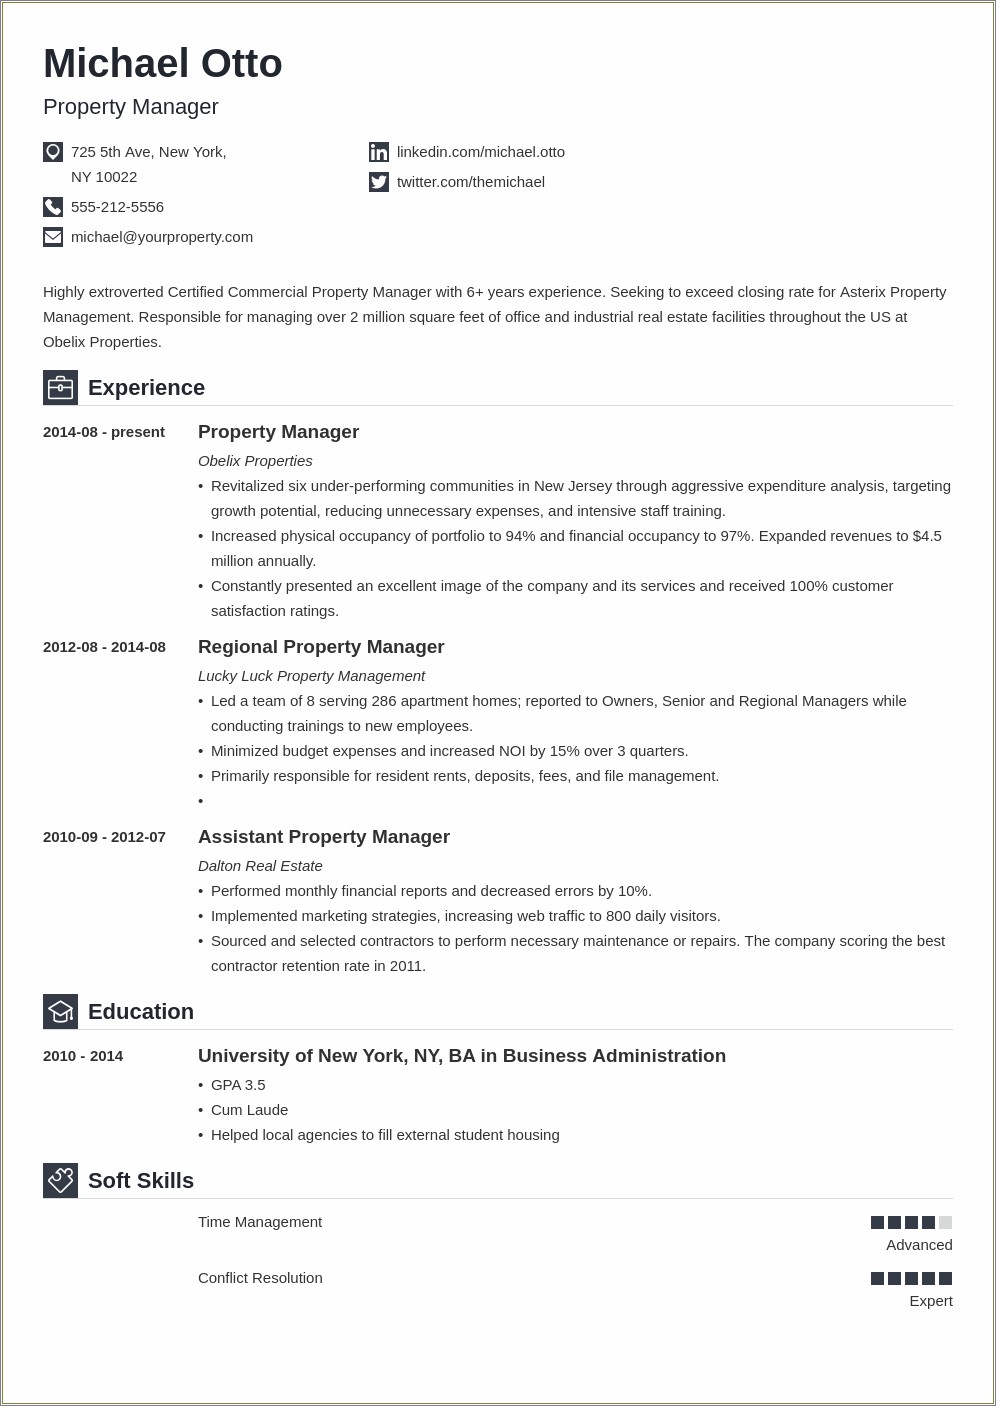 Resume Statement For Managing Assets Through Lifecycle Management